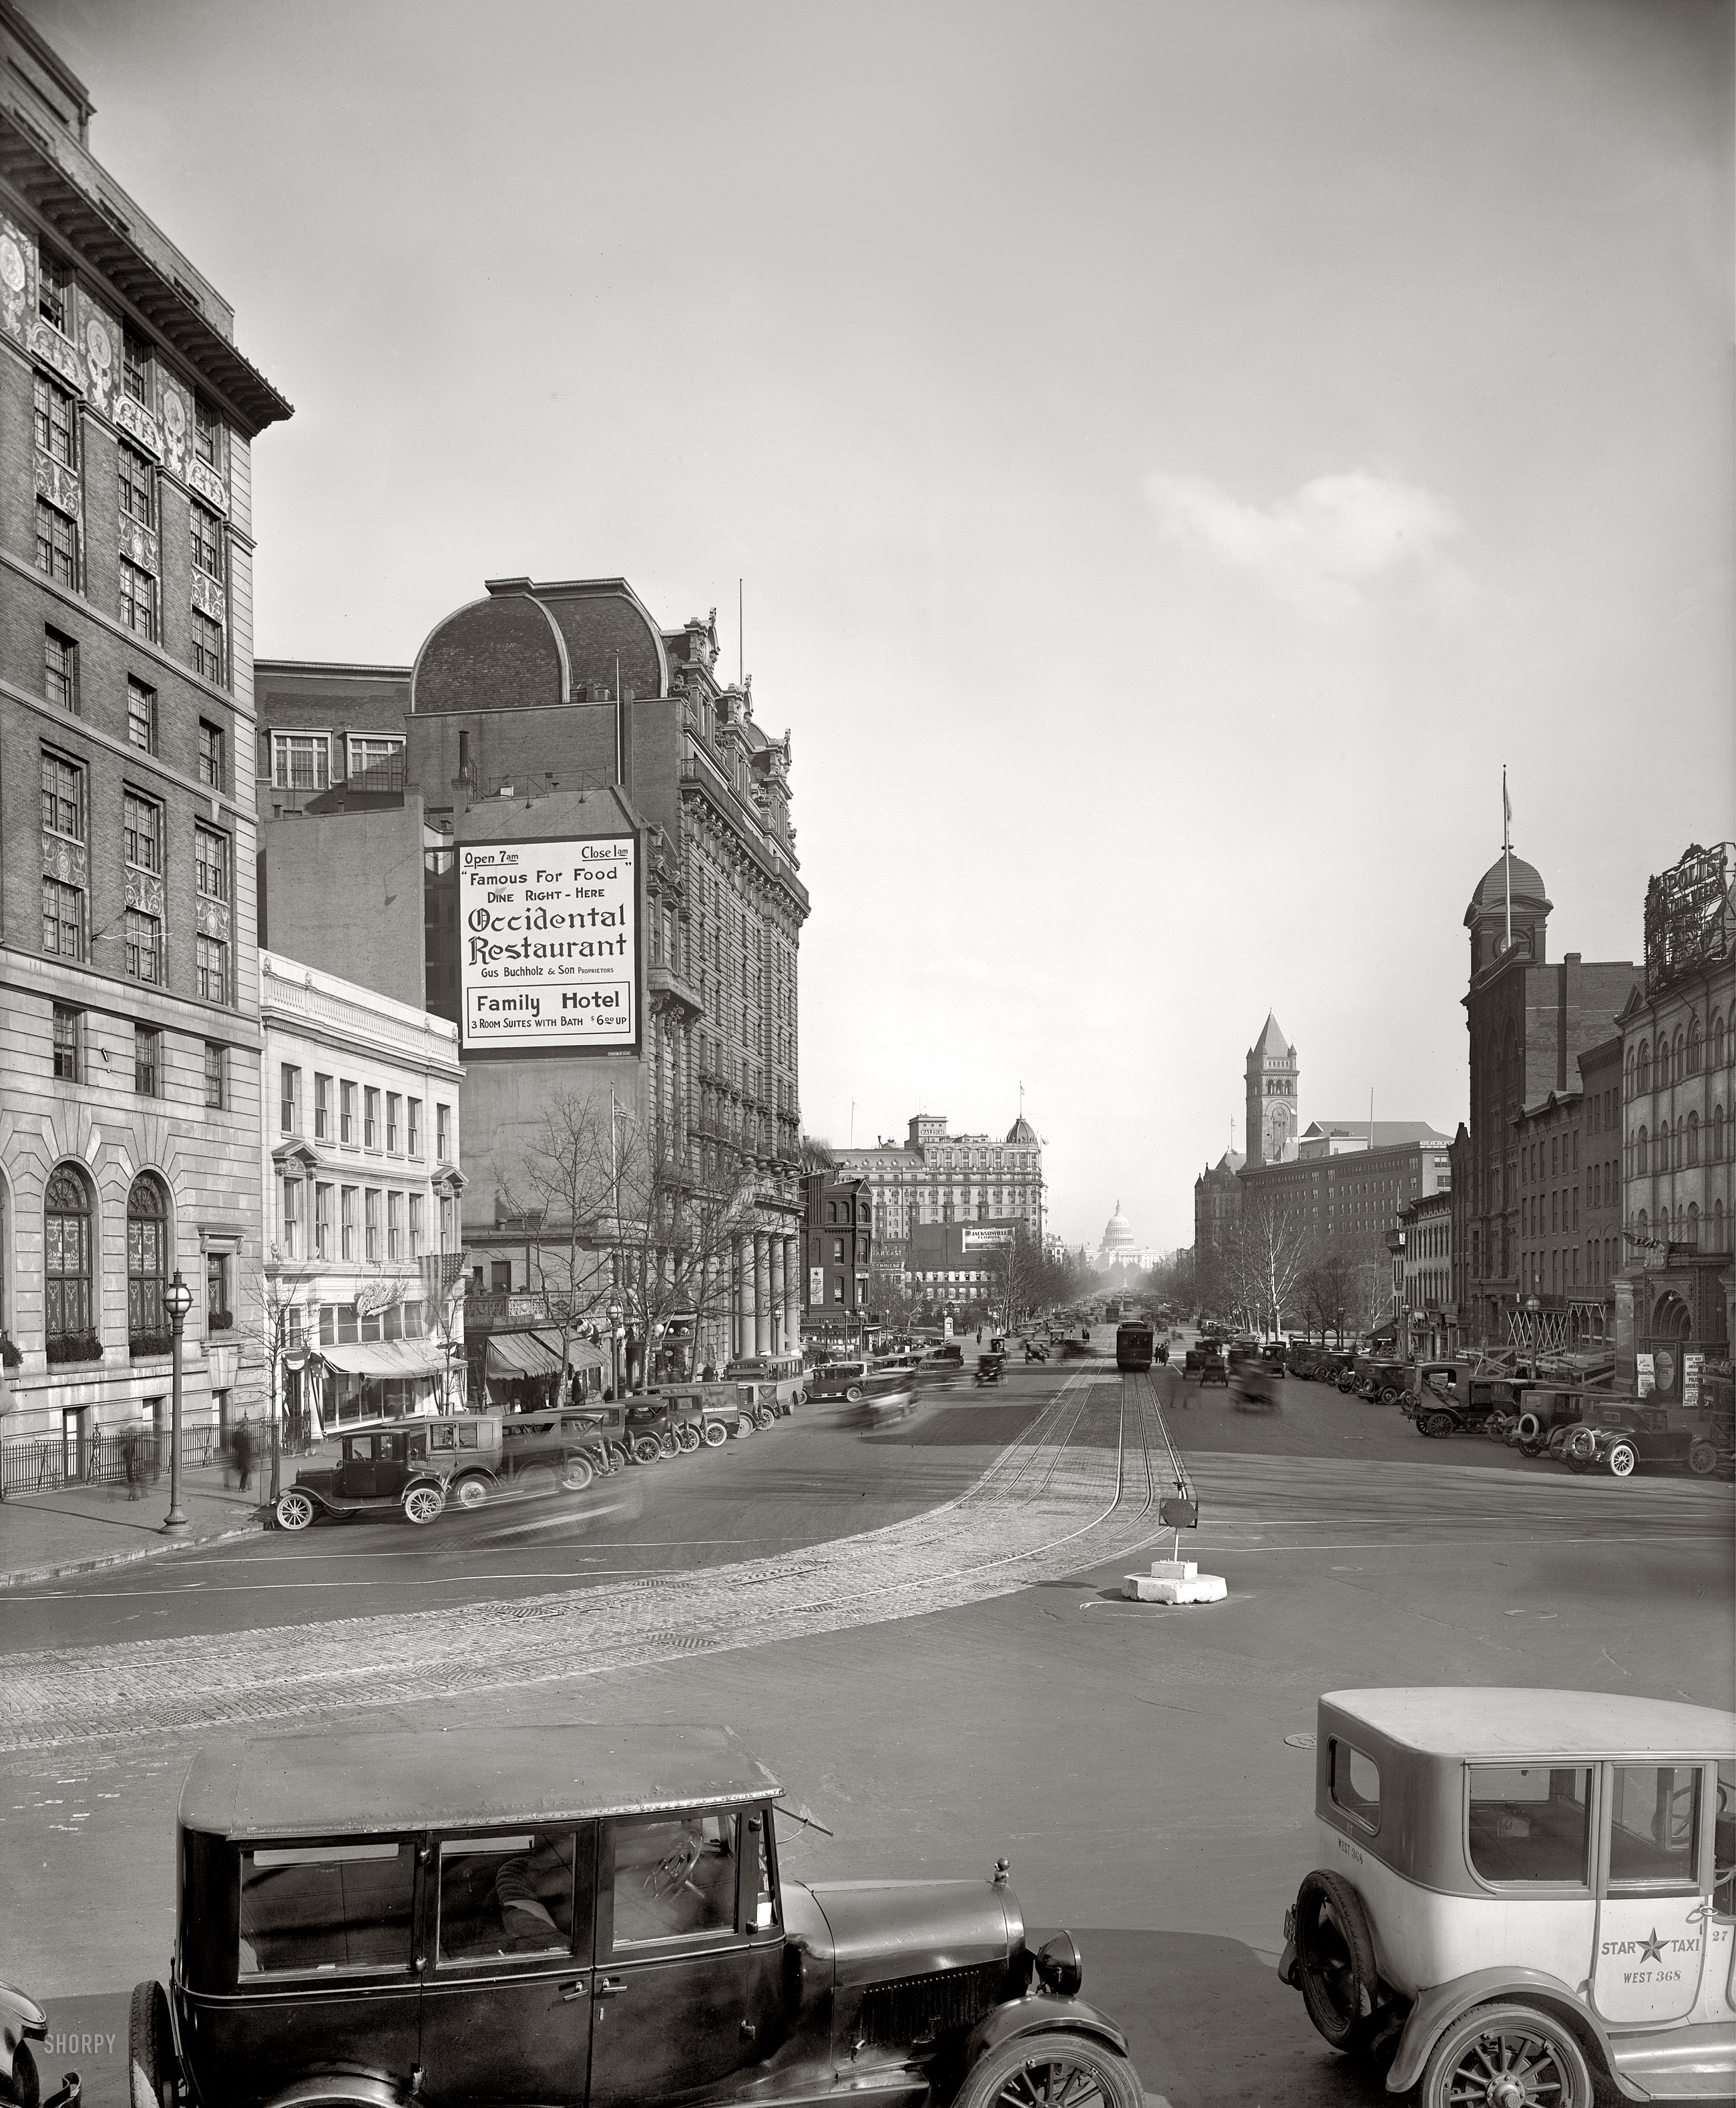 March 1925. Washington, D.C. "Pennsylvania Avenue." Lots of Shorpy landmarks here. Harris & Ewing Collection glass negative. View full size.